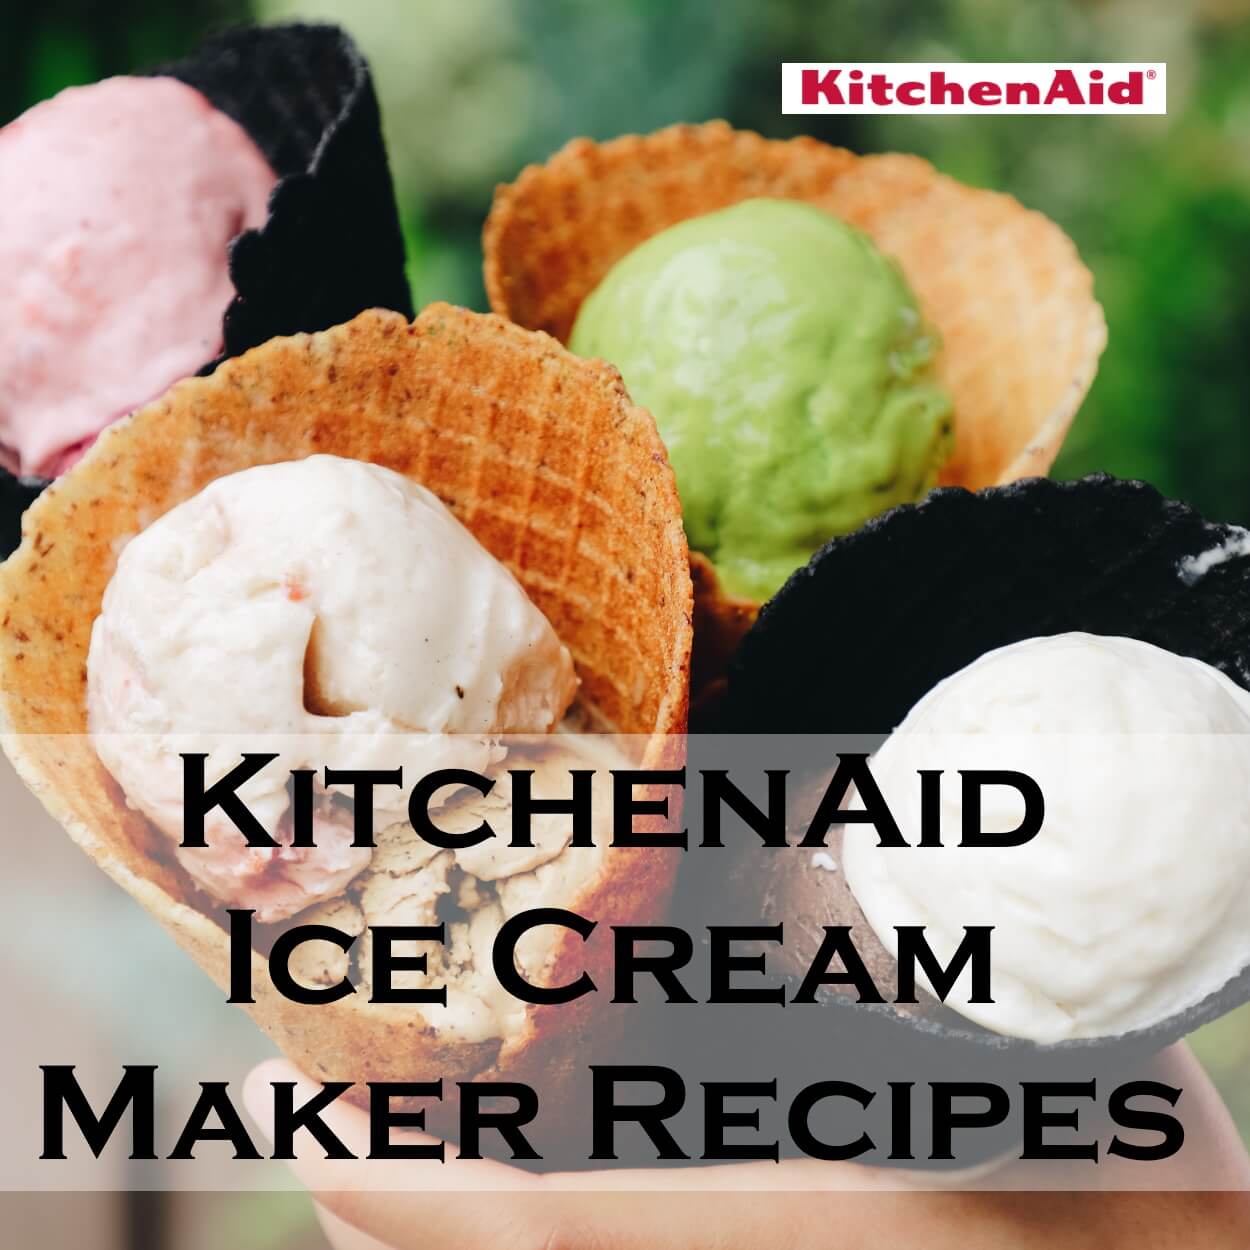 Our Kitchenaid Ice Cream Maker Recipe Book: 125 Yummy Desserts for Your 2  Quart Stand Mixer Attachment by Two Scoops